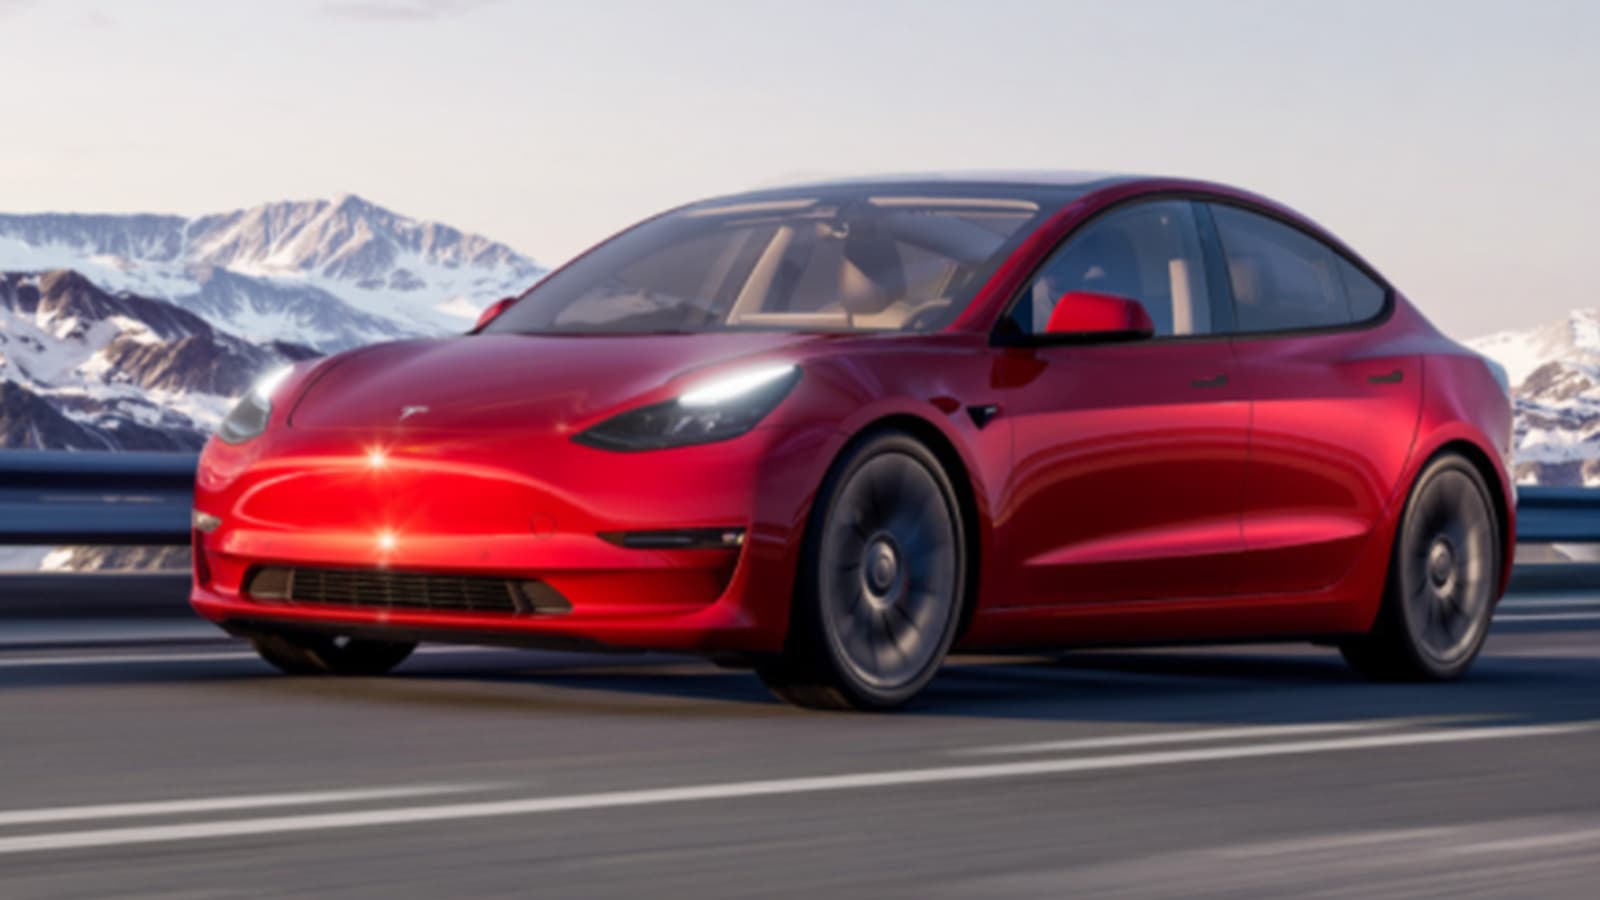 Tesla Recalls 475,000 Model 3, Model S Electric Cars Over Safety Issues